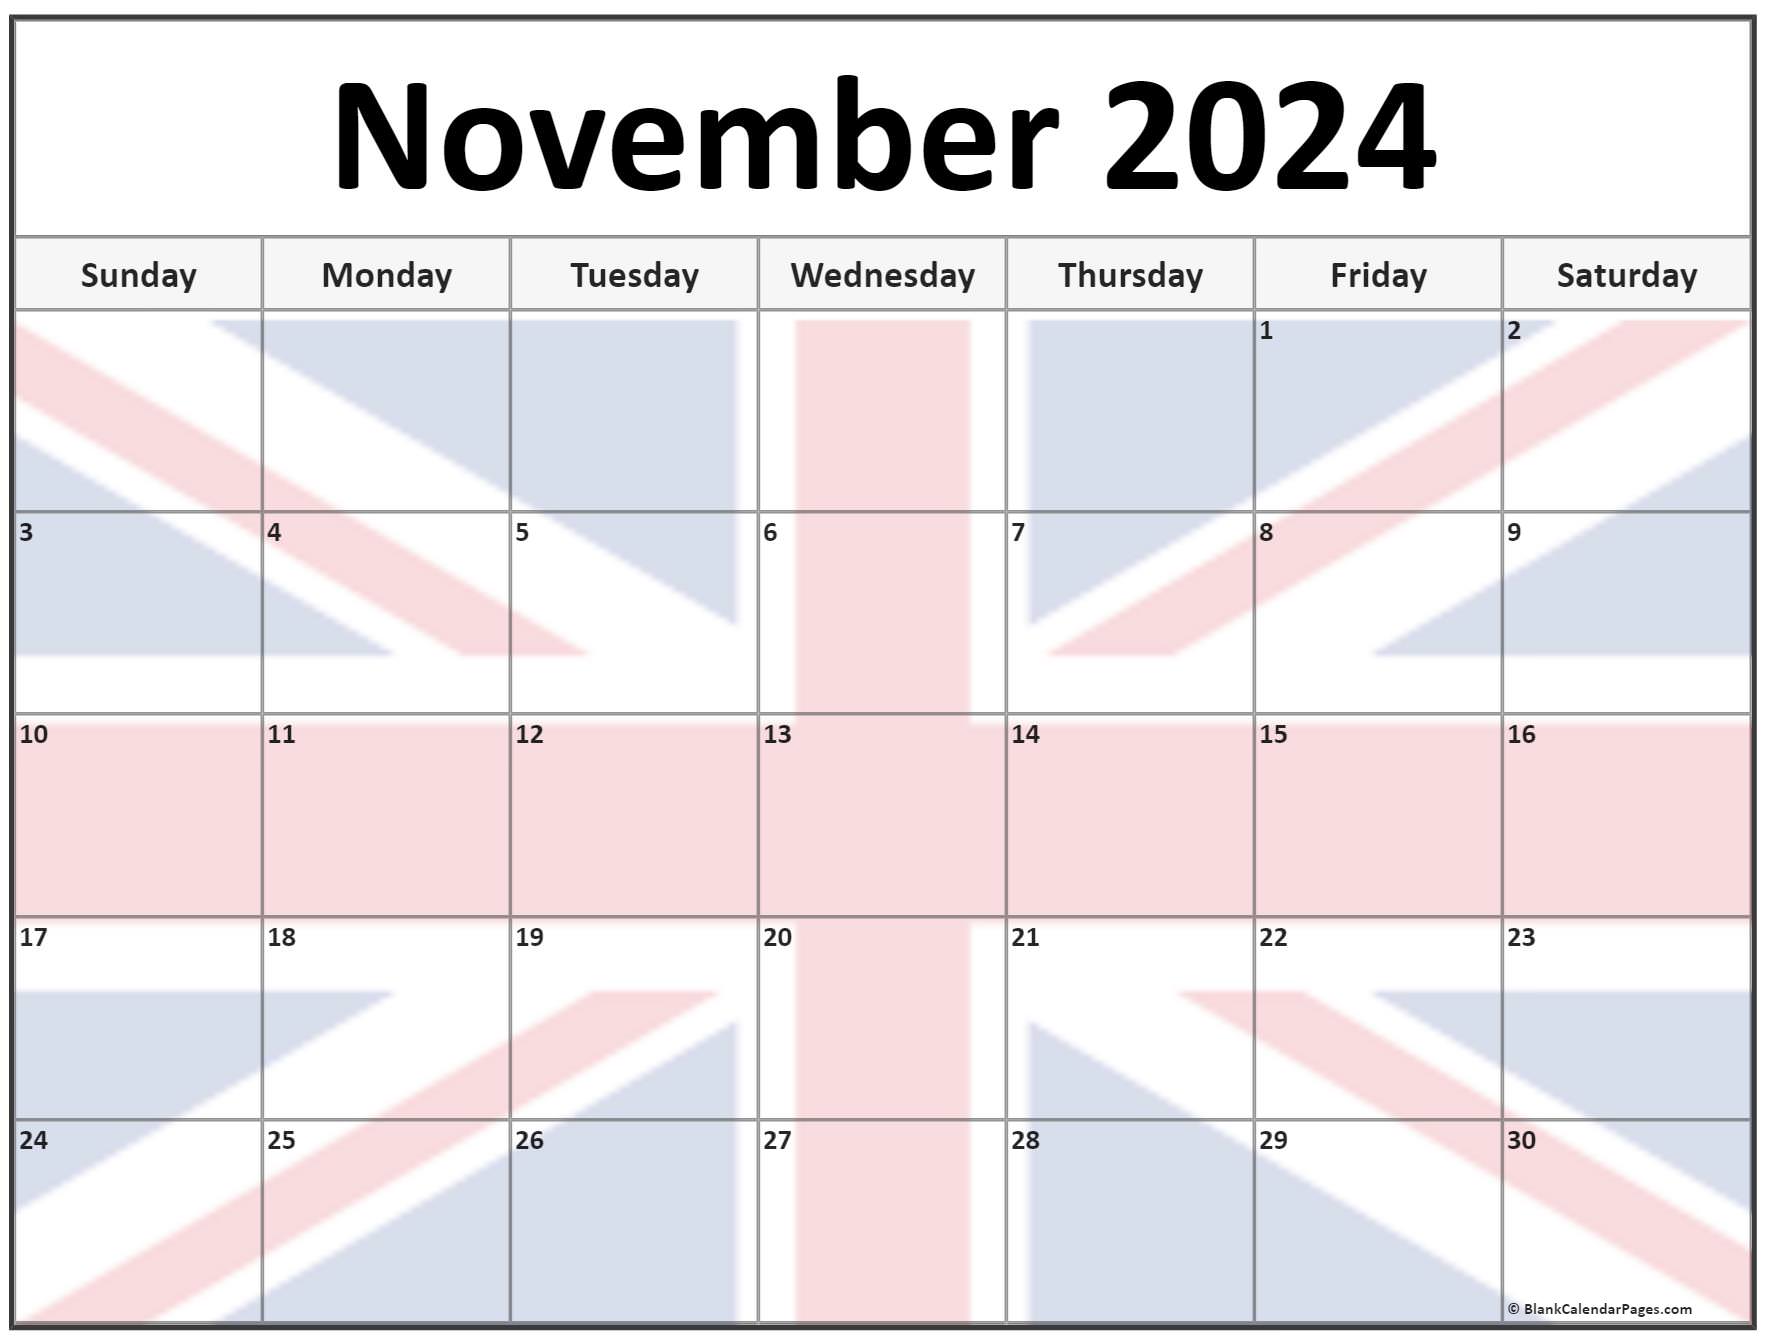 collection-of-november-2022-photo-calendars-with-image-filters